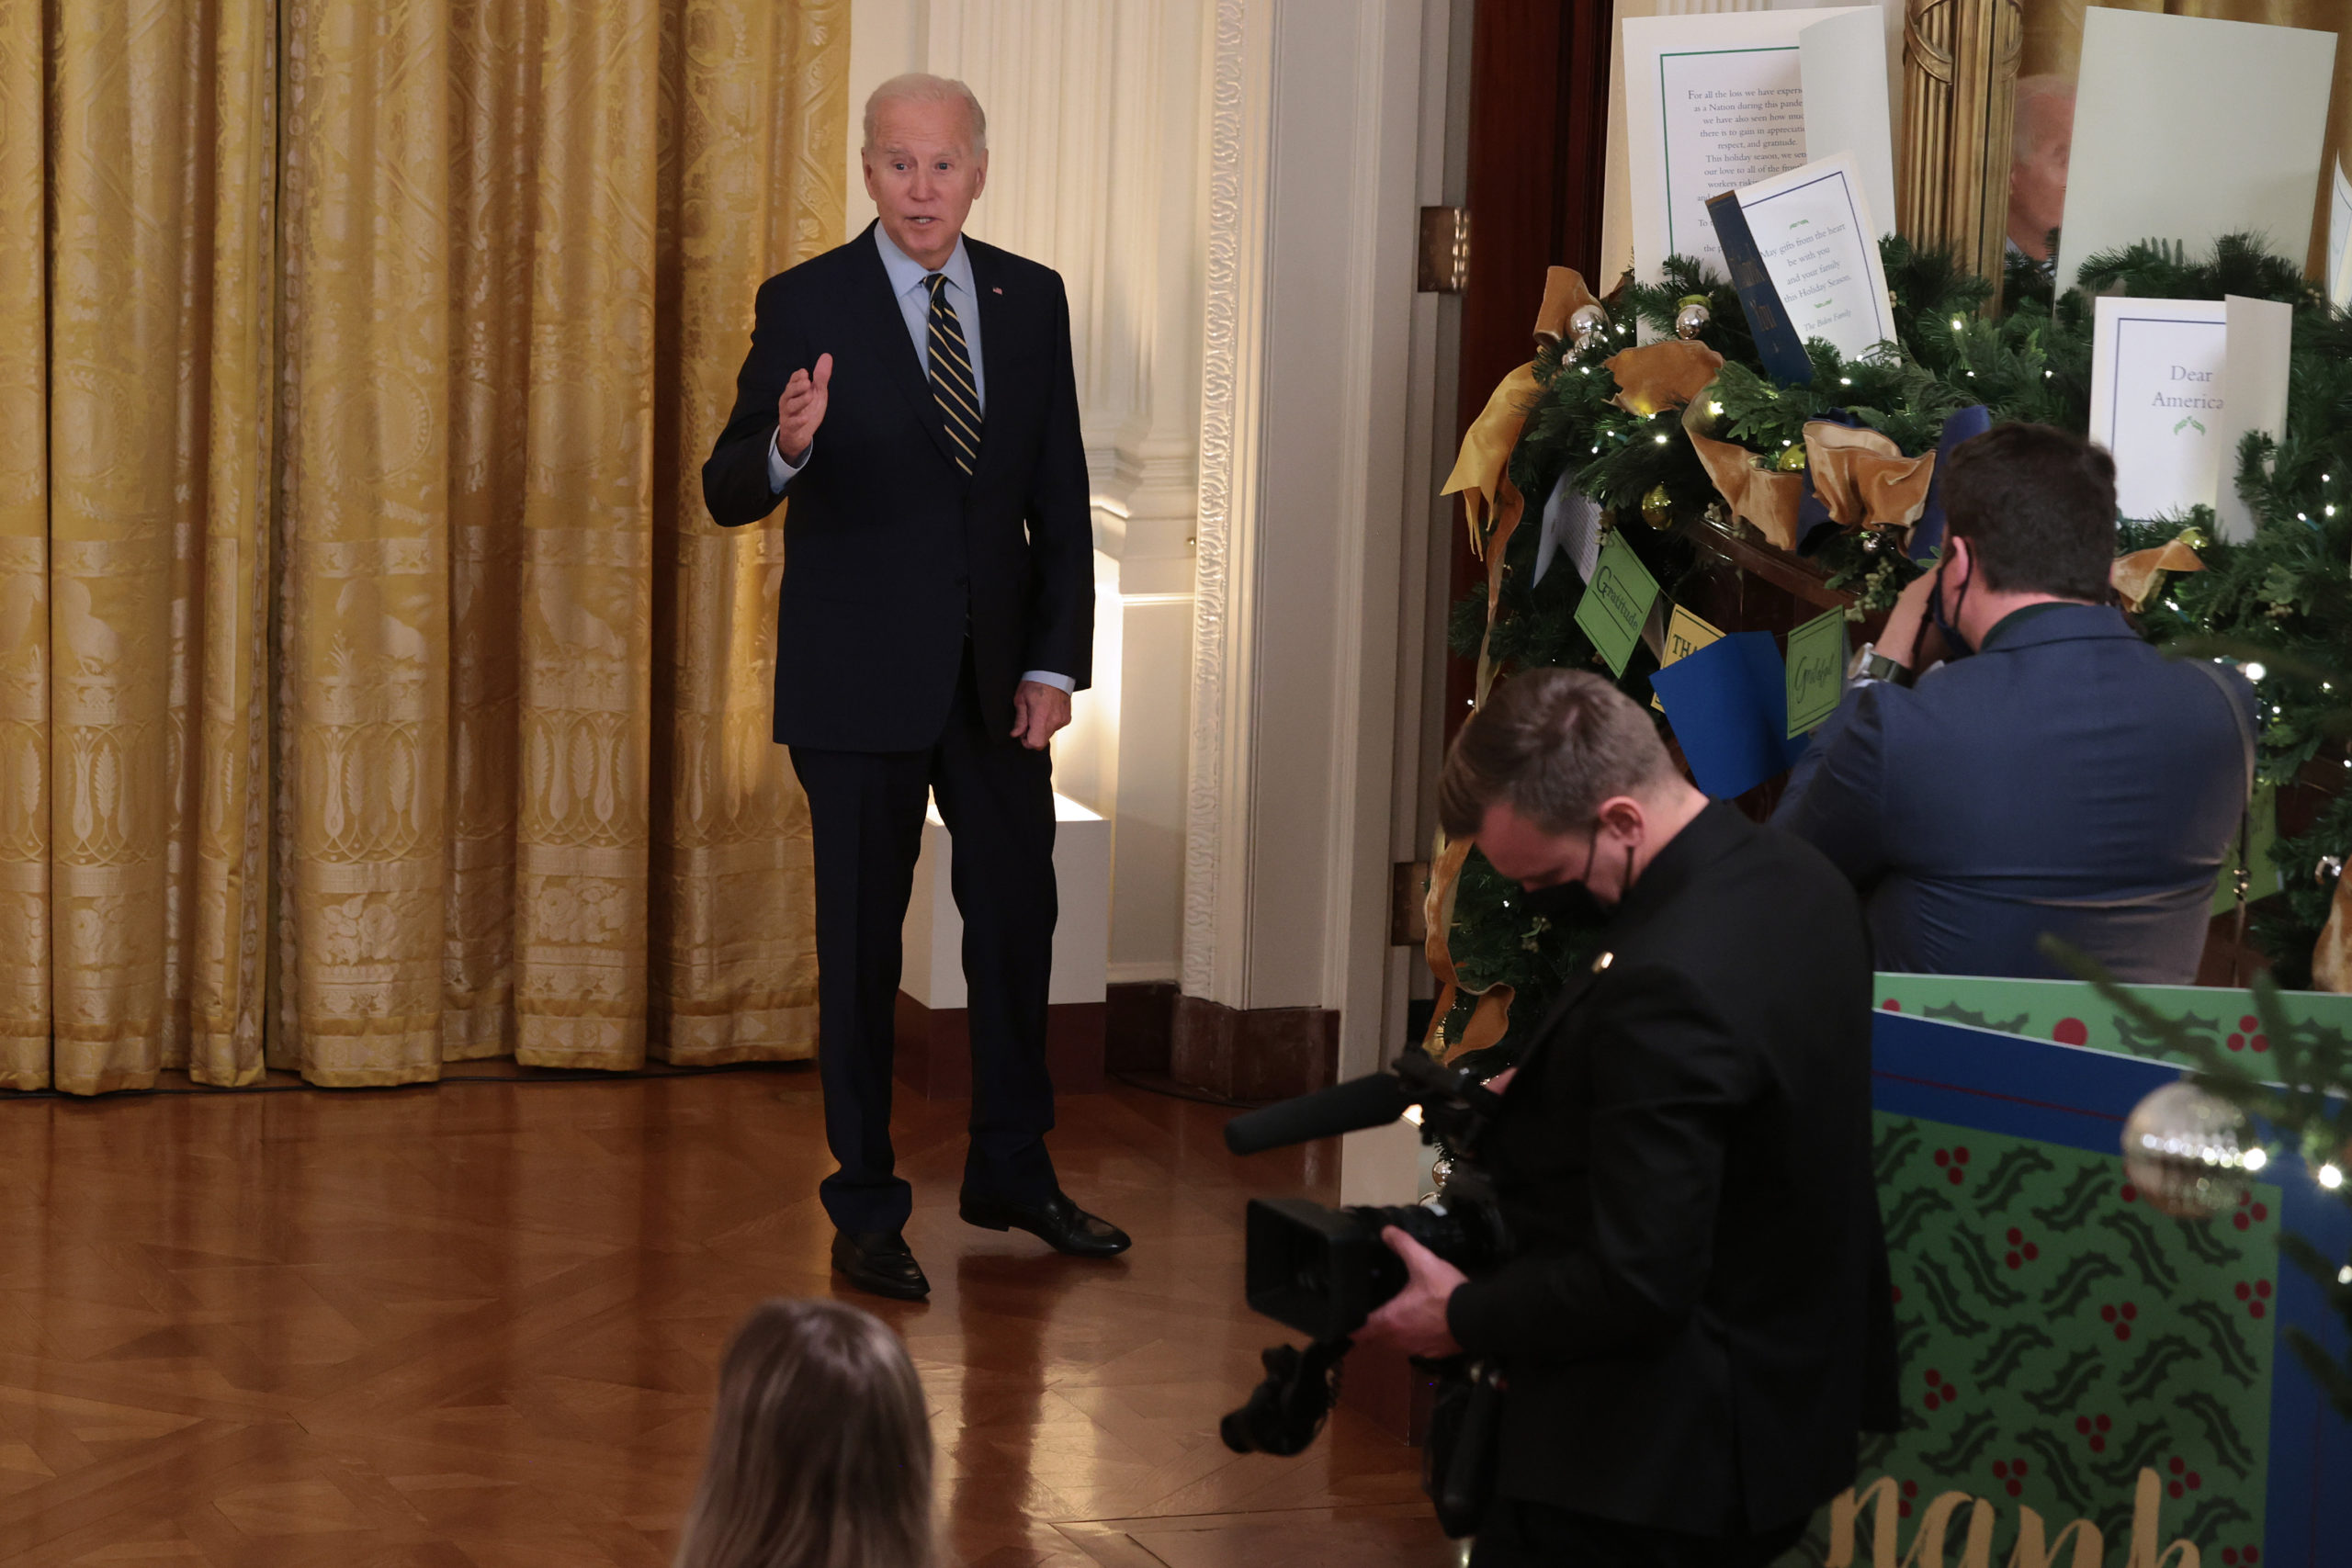 WASHINGTON, DC - DECEMBER 06: U.S. President Joe Biden pauses to answer a question before leaving the East Room after talking about the Build Back Better legislation's new rules around prescription drug prices at the White House on December 06, 2021 in Washington, DC. According to the White House, the legislation will lower the costs of prescription drugs by giving negotiation powers to Medicare, imposing a tax penalty if drug companies increase prices faster than inflation, lowering insulin prices to $35 a month for people with diabetes and other regulations. (Photo by Chip Somodevilla/Getty Images)